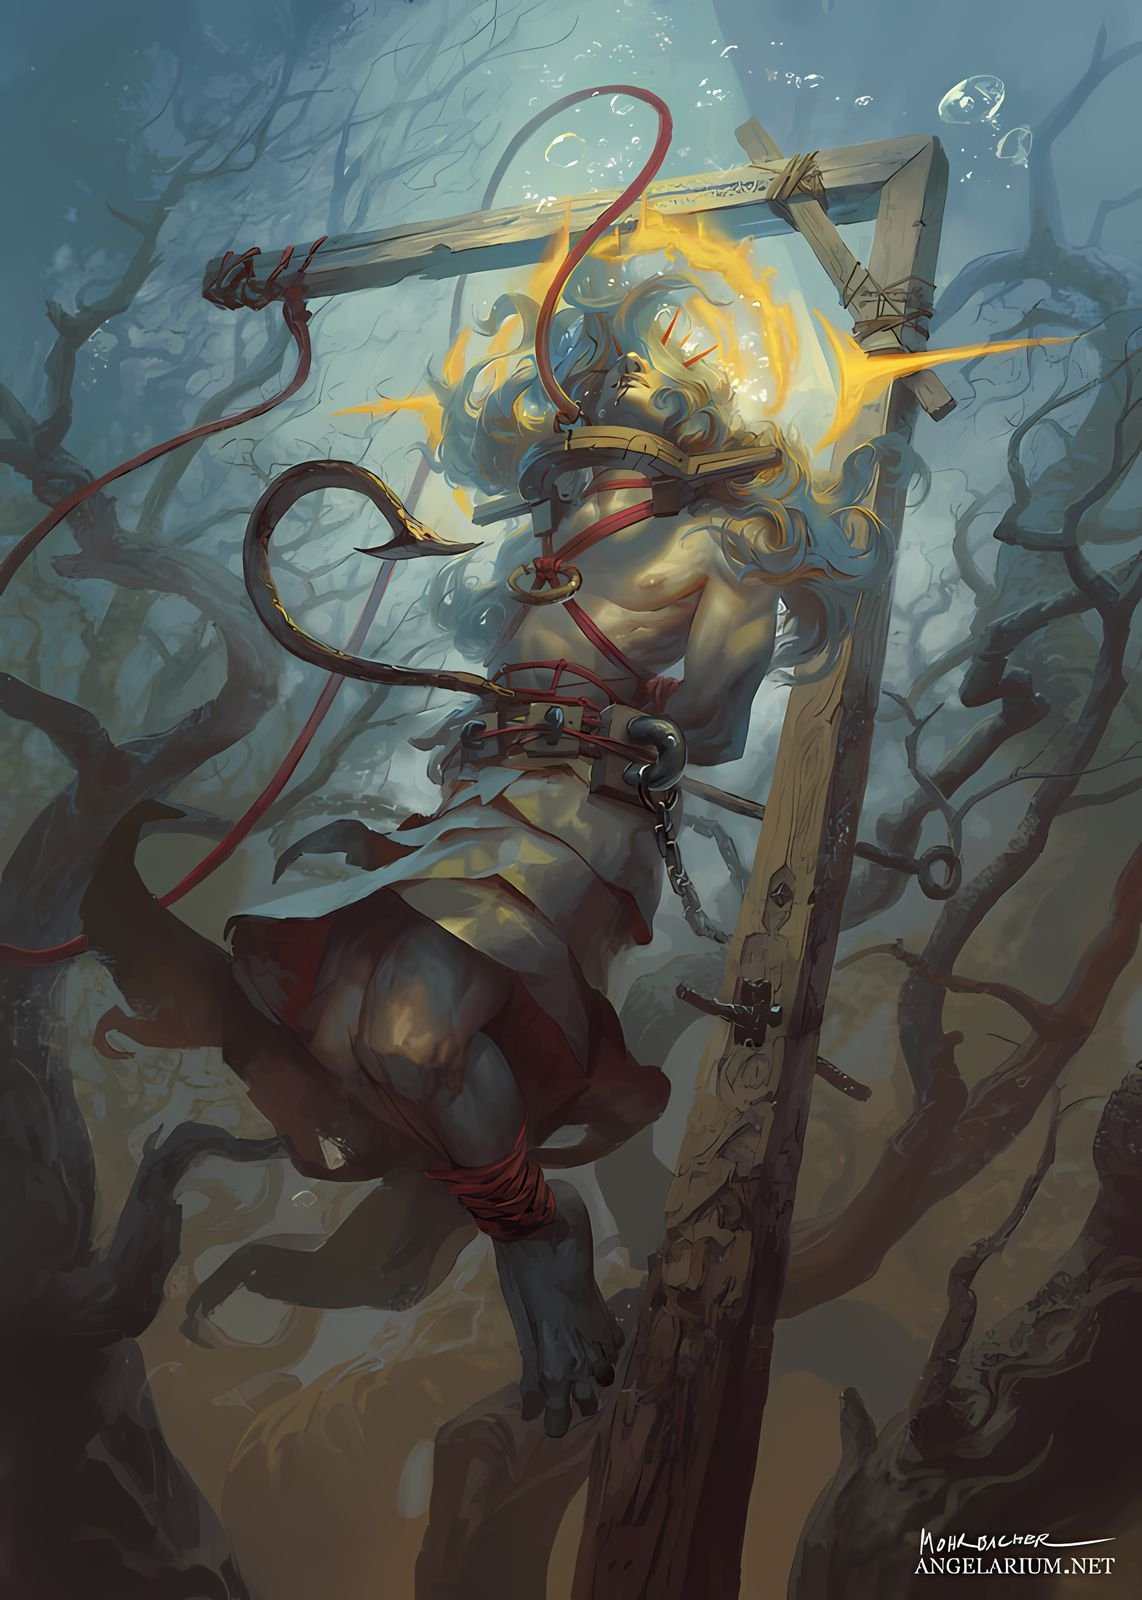 Peter Mohrbacher Blends Surrealism With Fantasy To Create Powerful Magical Beings (15)